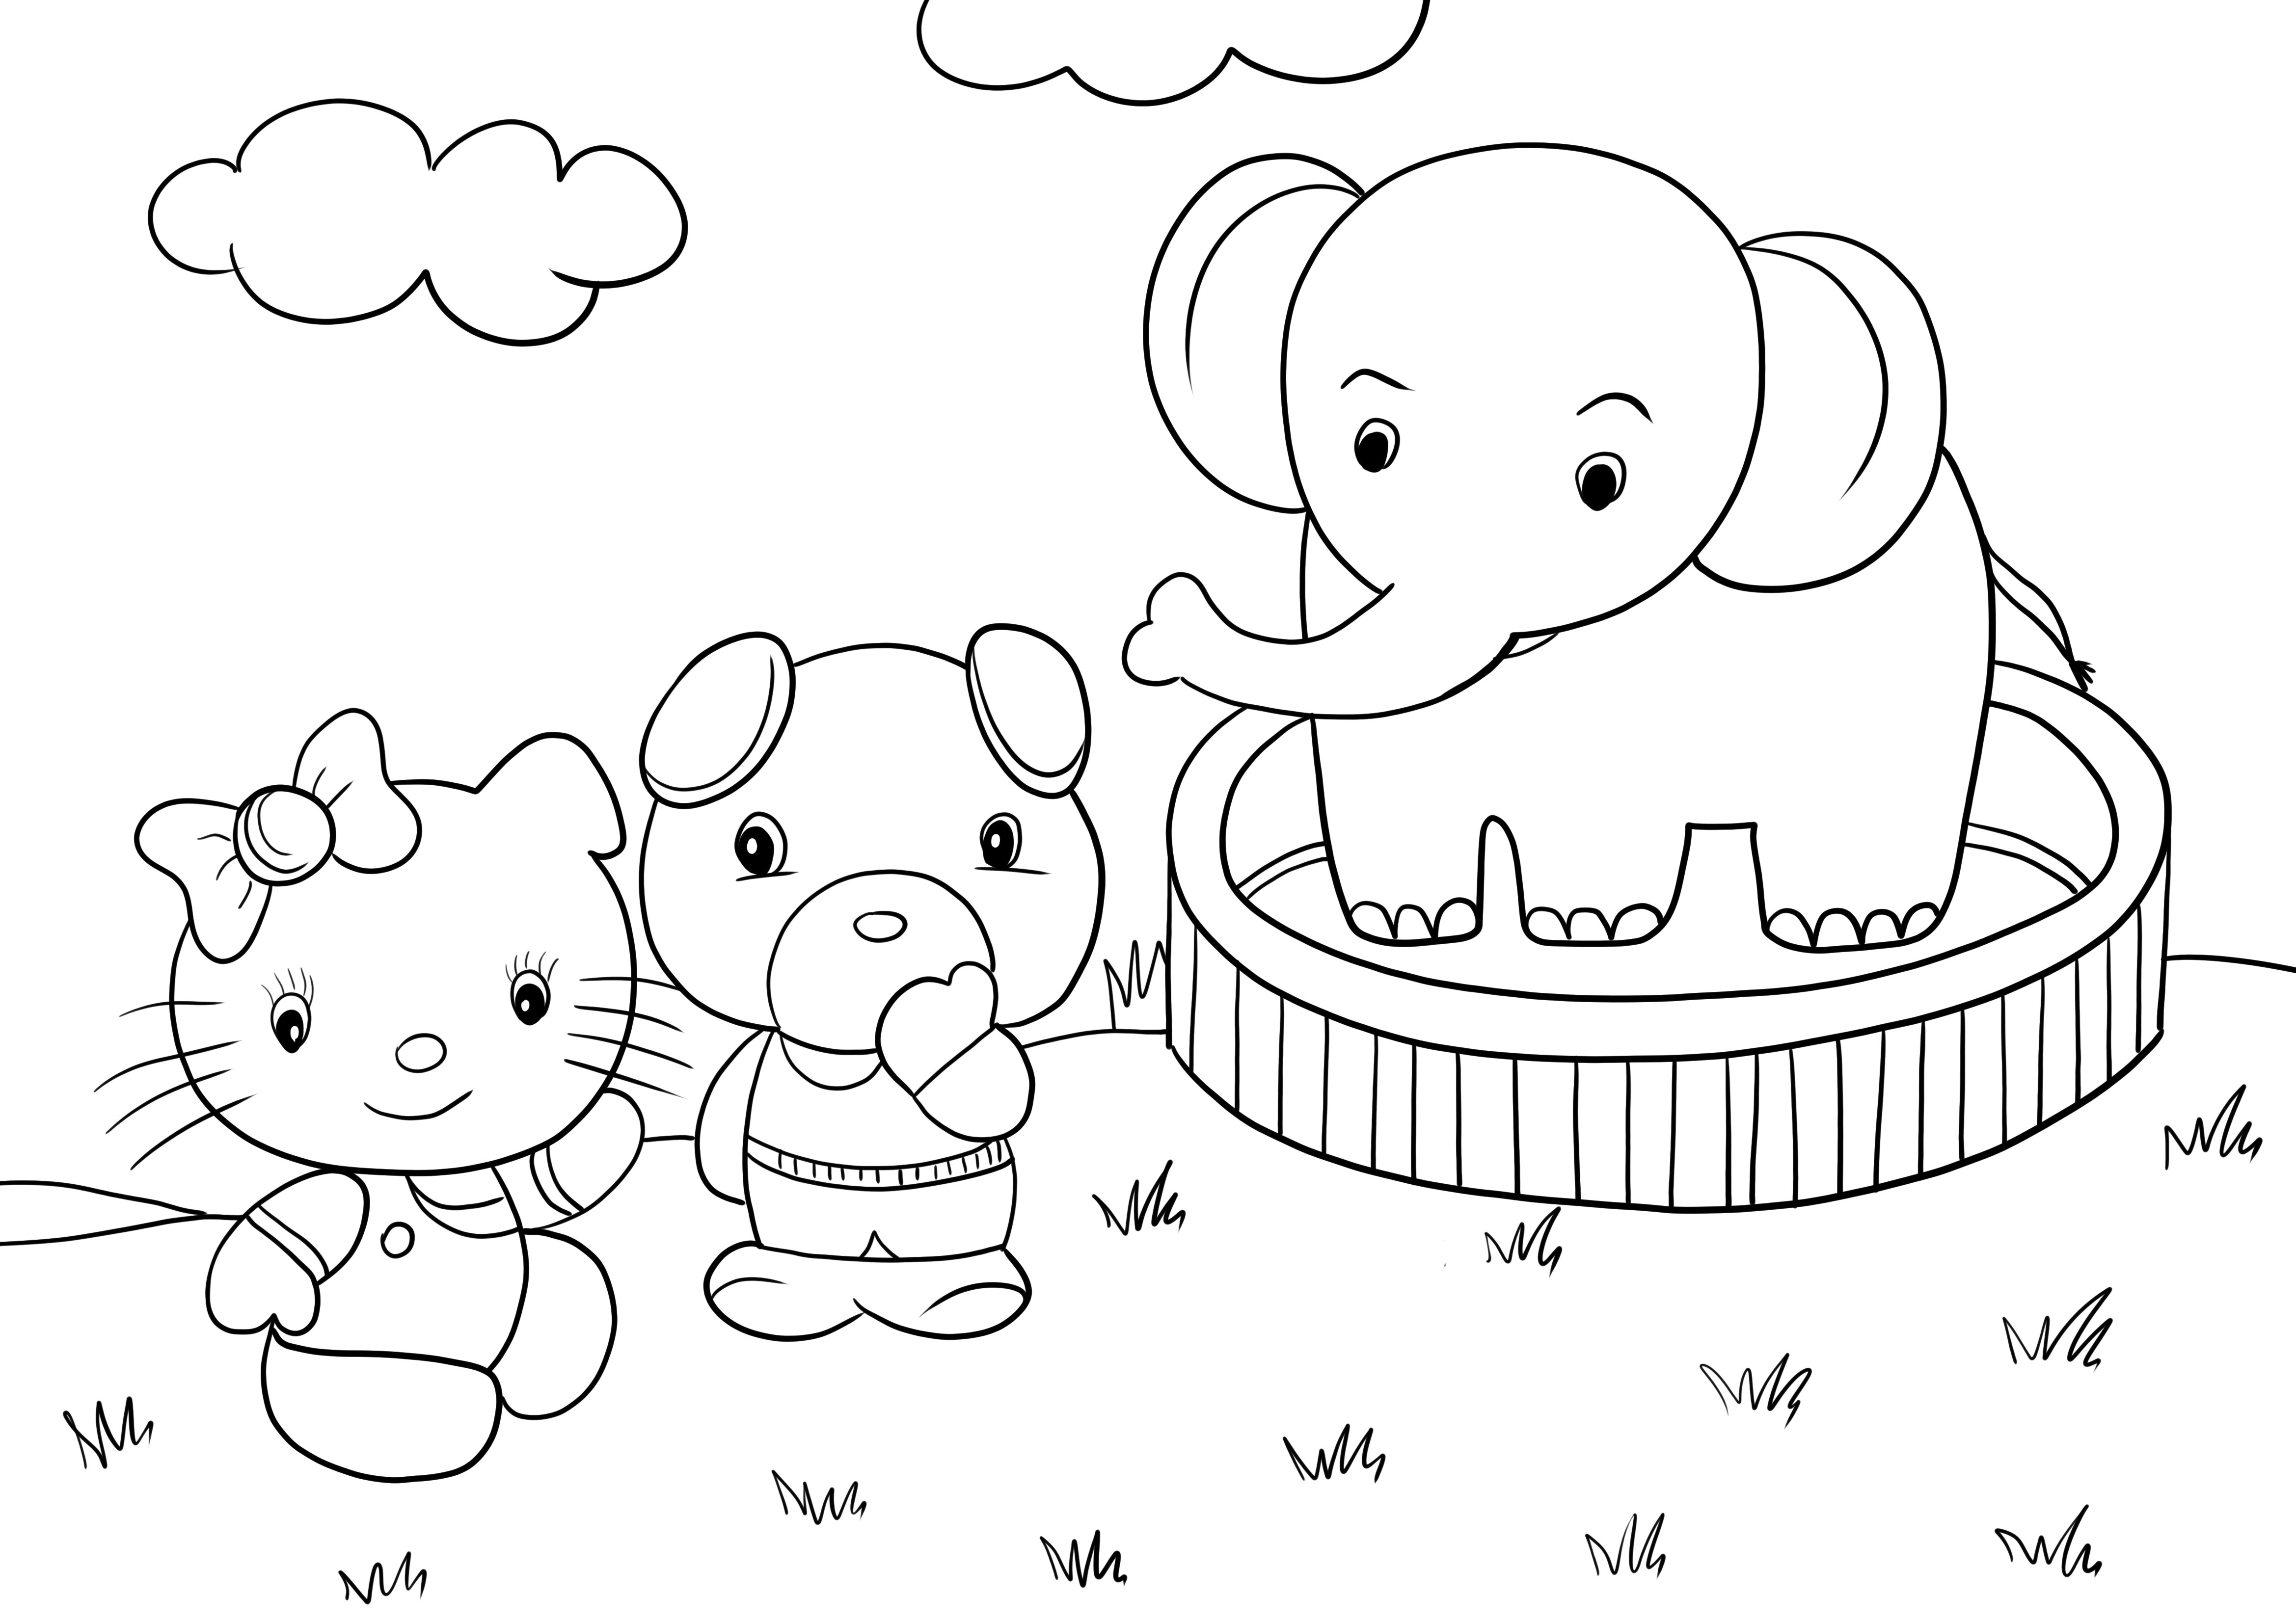 Hello Kitty at the zoo free download and color image